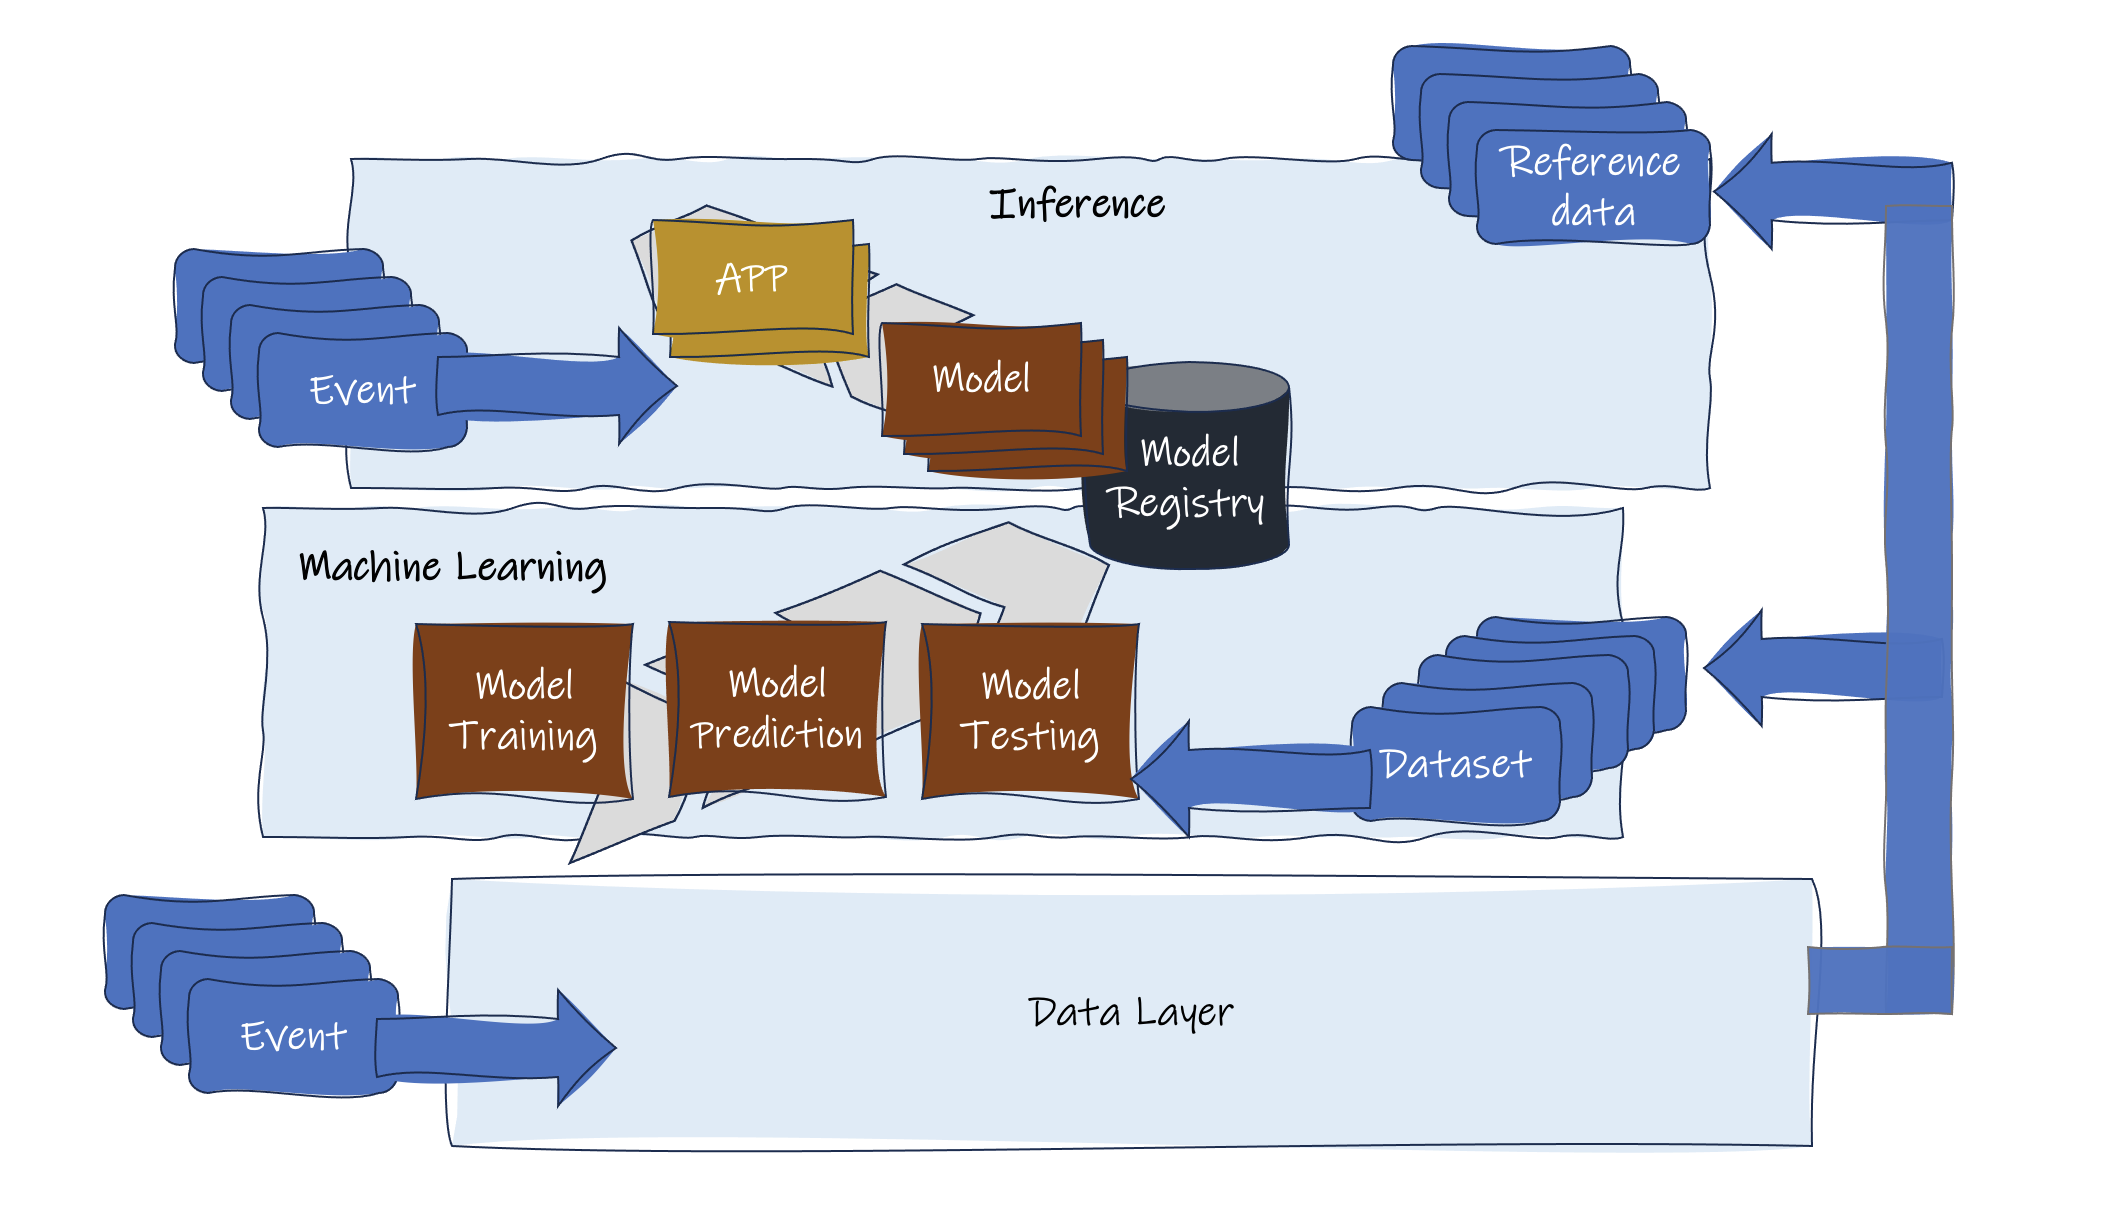 Diagram showing the data flow for AI/ML